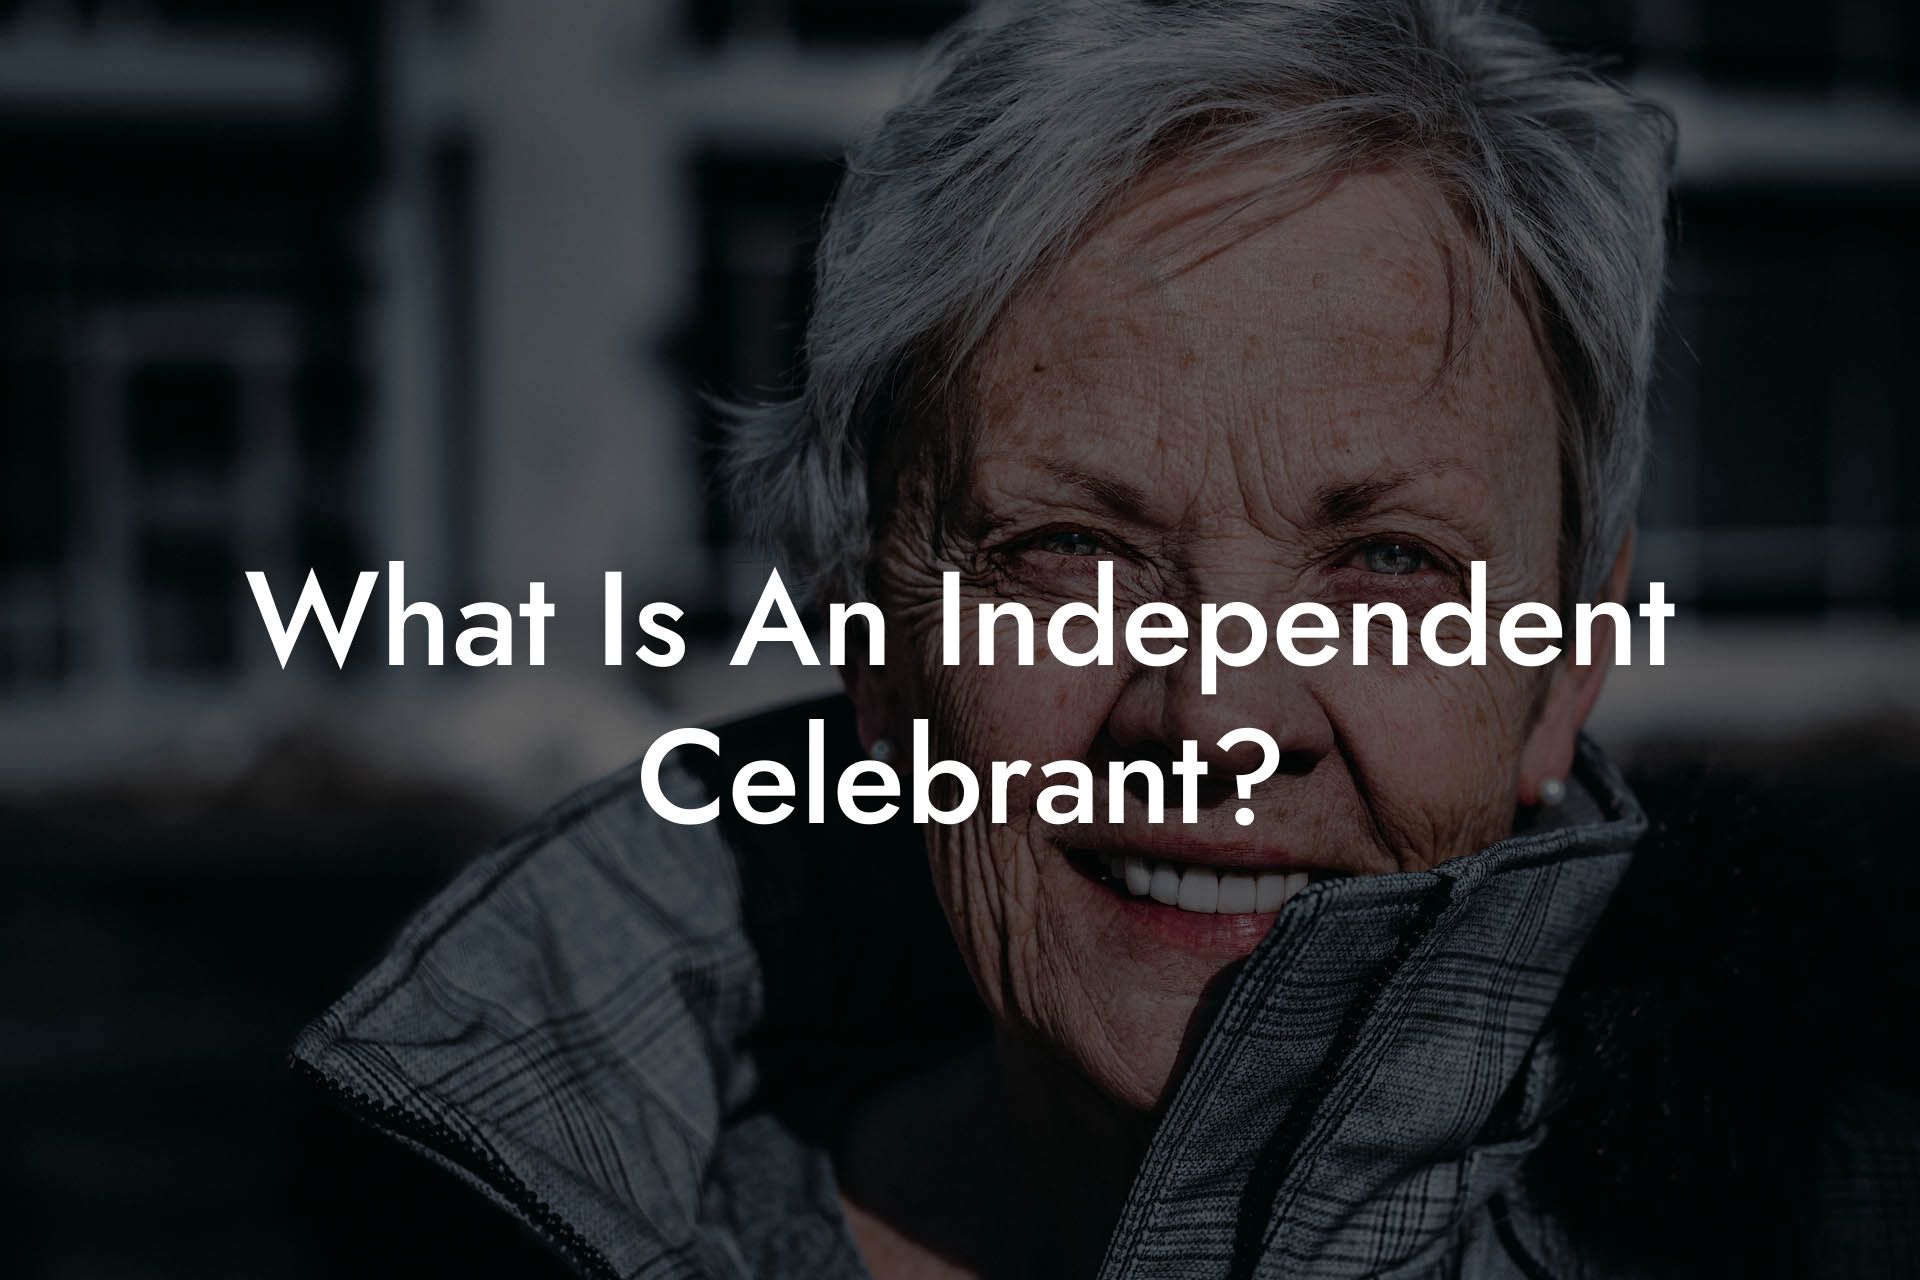 What Is An Independent Celebrant?